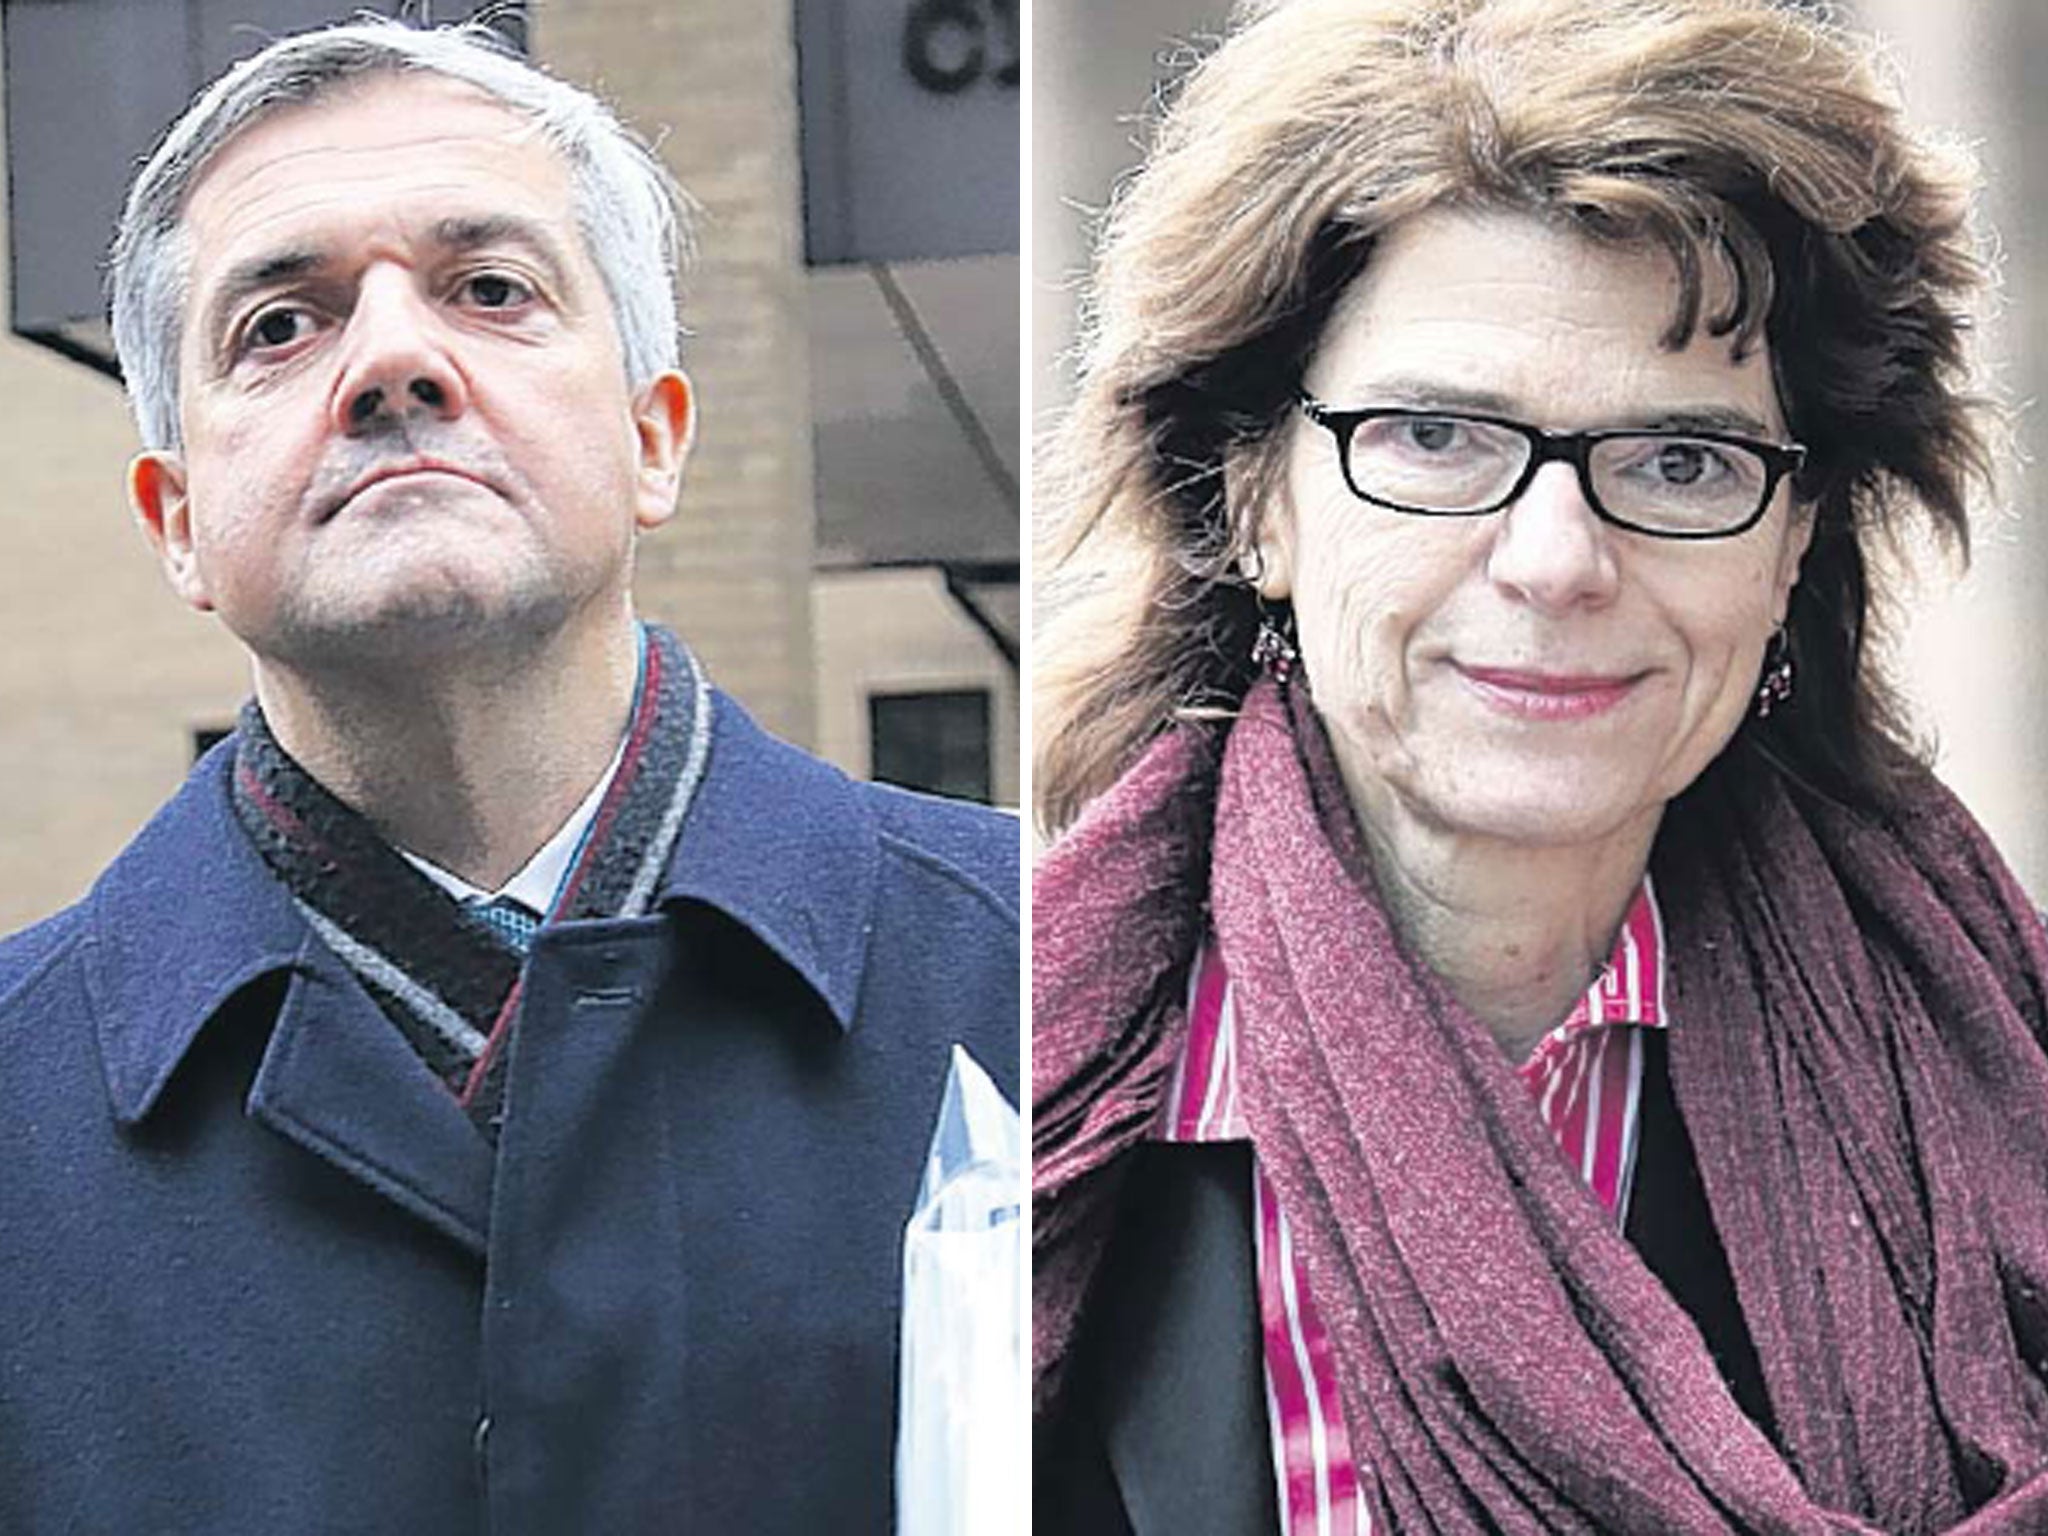 Chris Huhne outside Southwark Crown Court; he was charged alongside his former wife Vicky Pryce